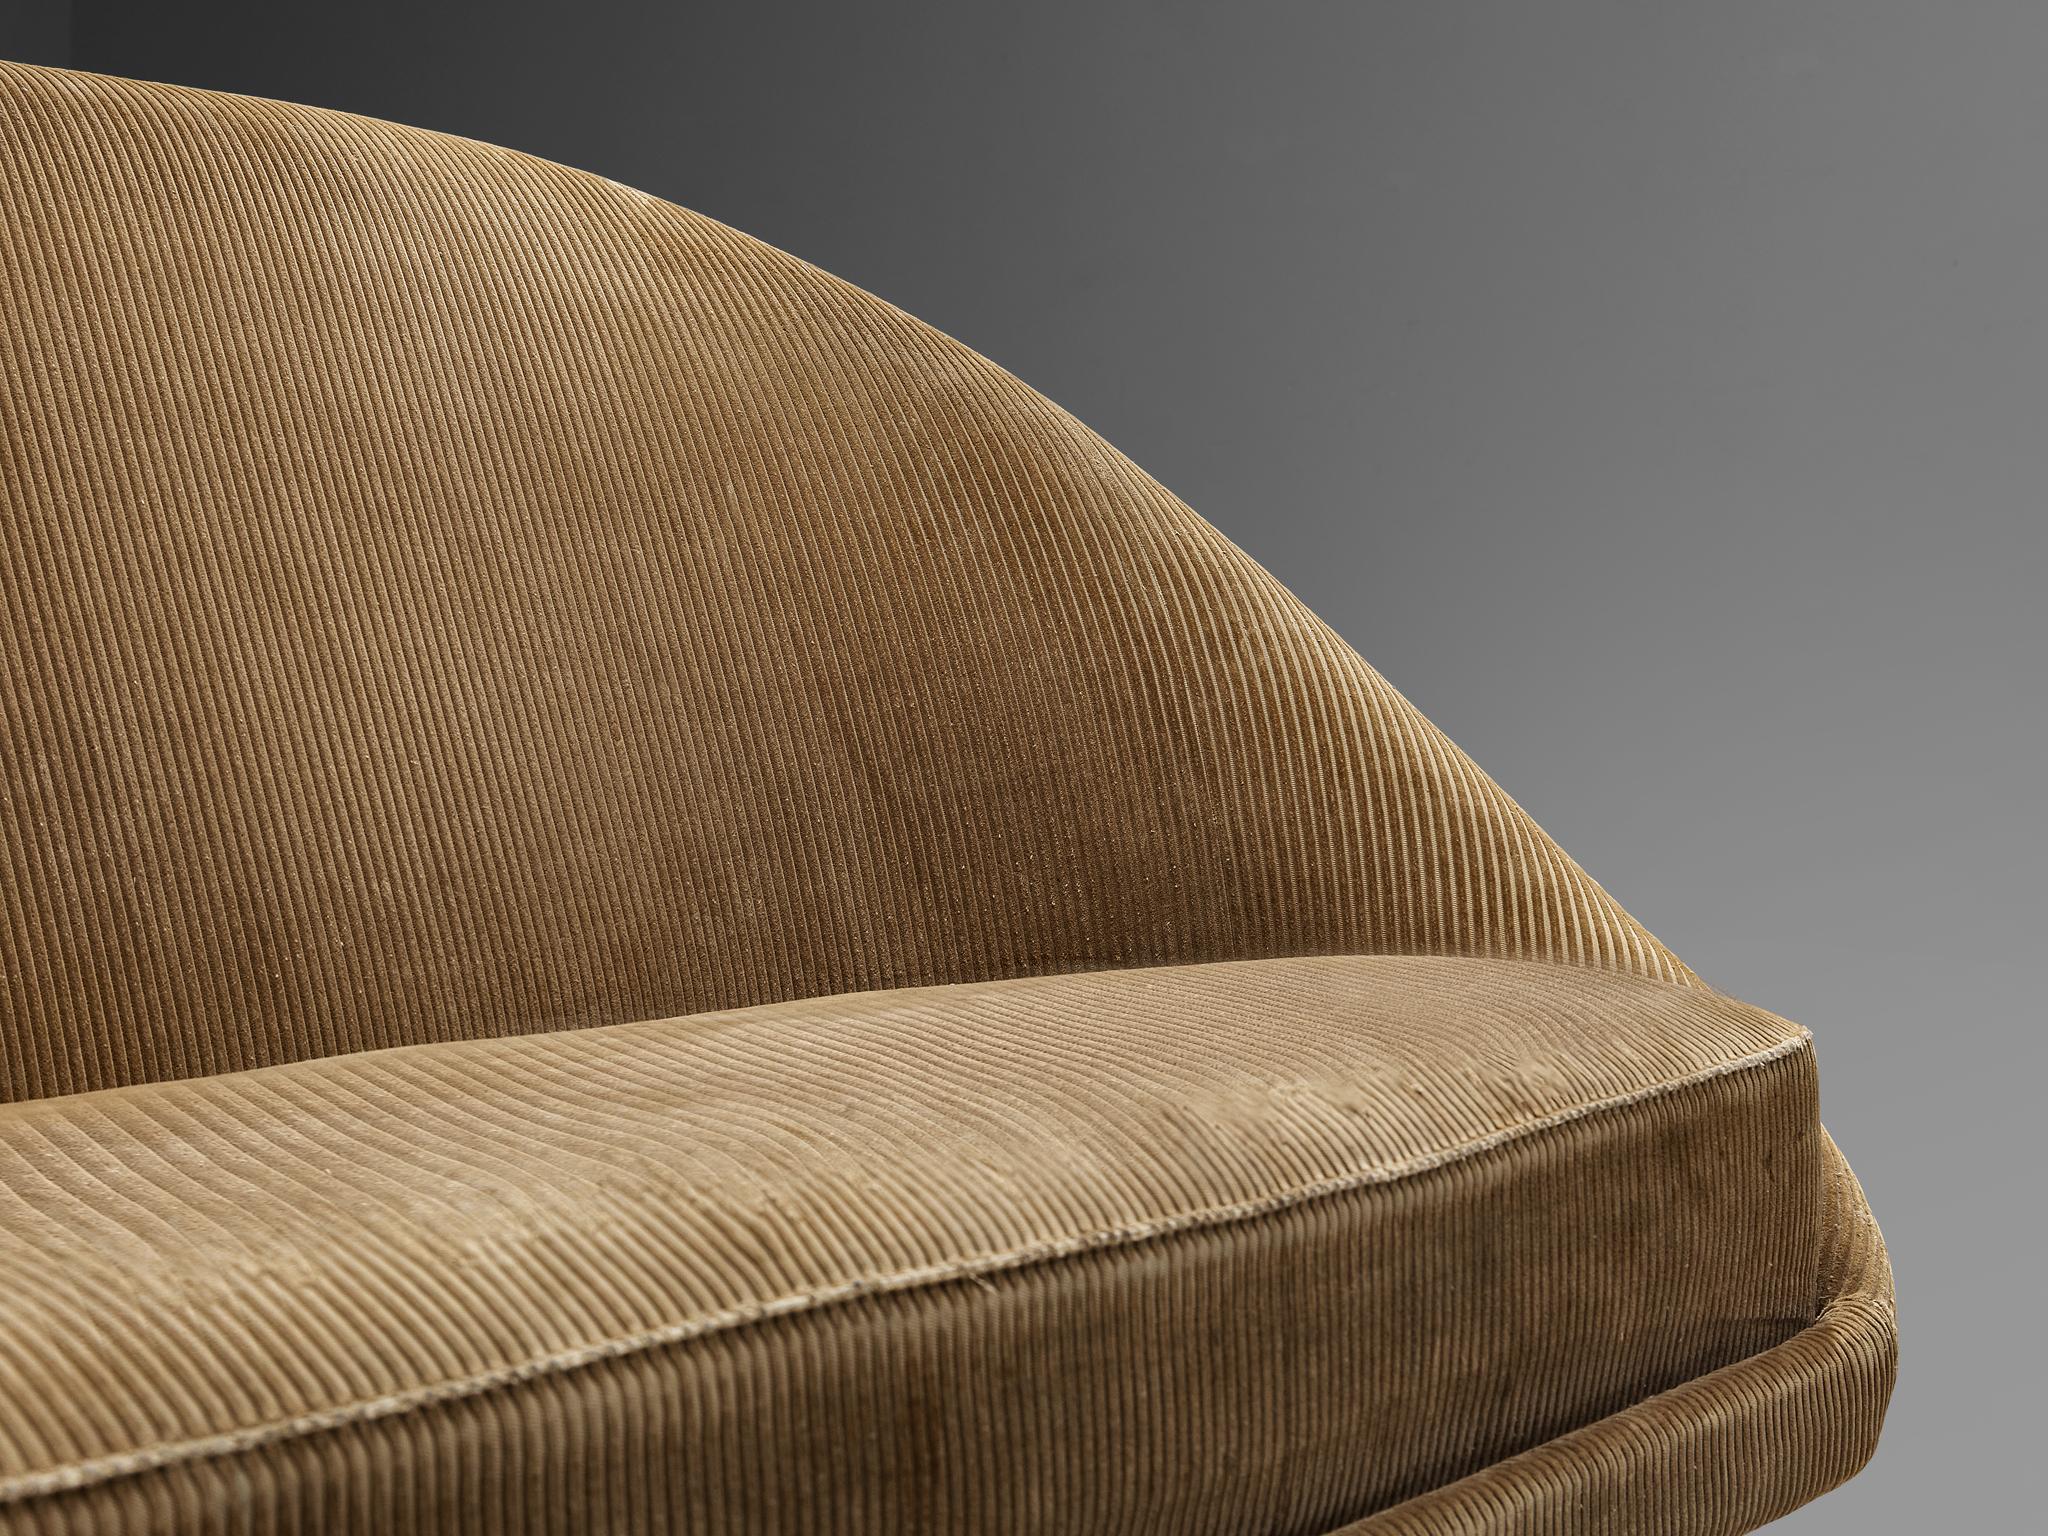 Late 20th Century Theo Ruth for Artifort Sofa in Beige Corduroy Upholstery